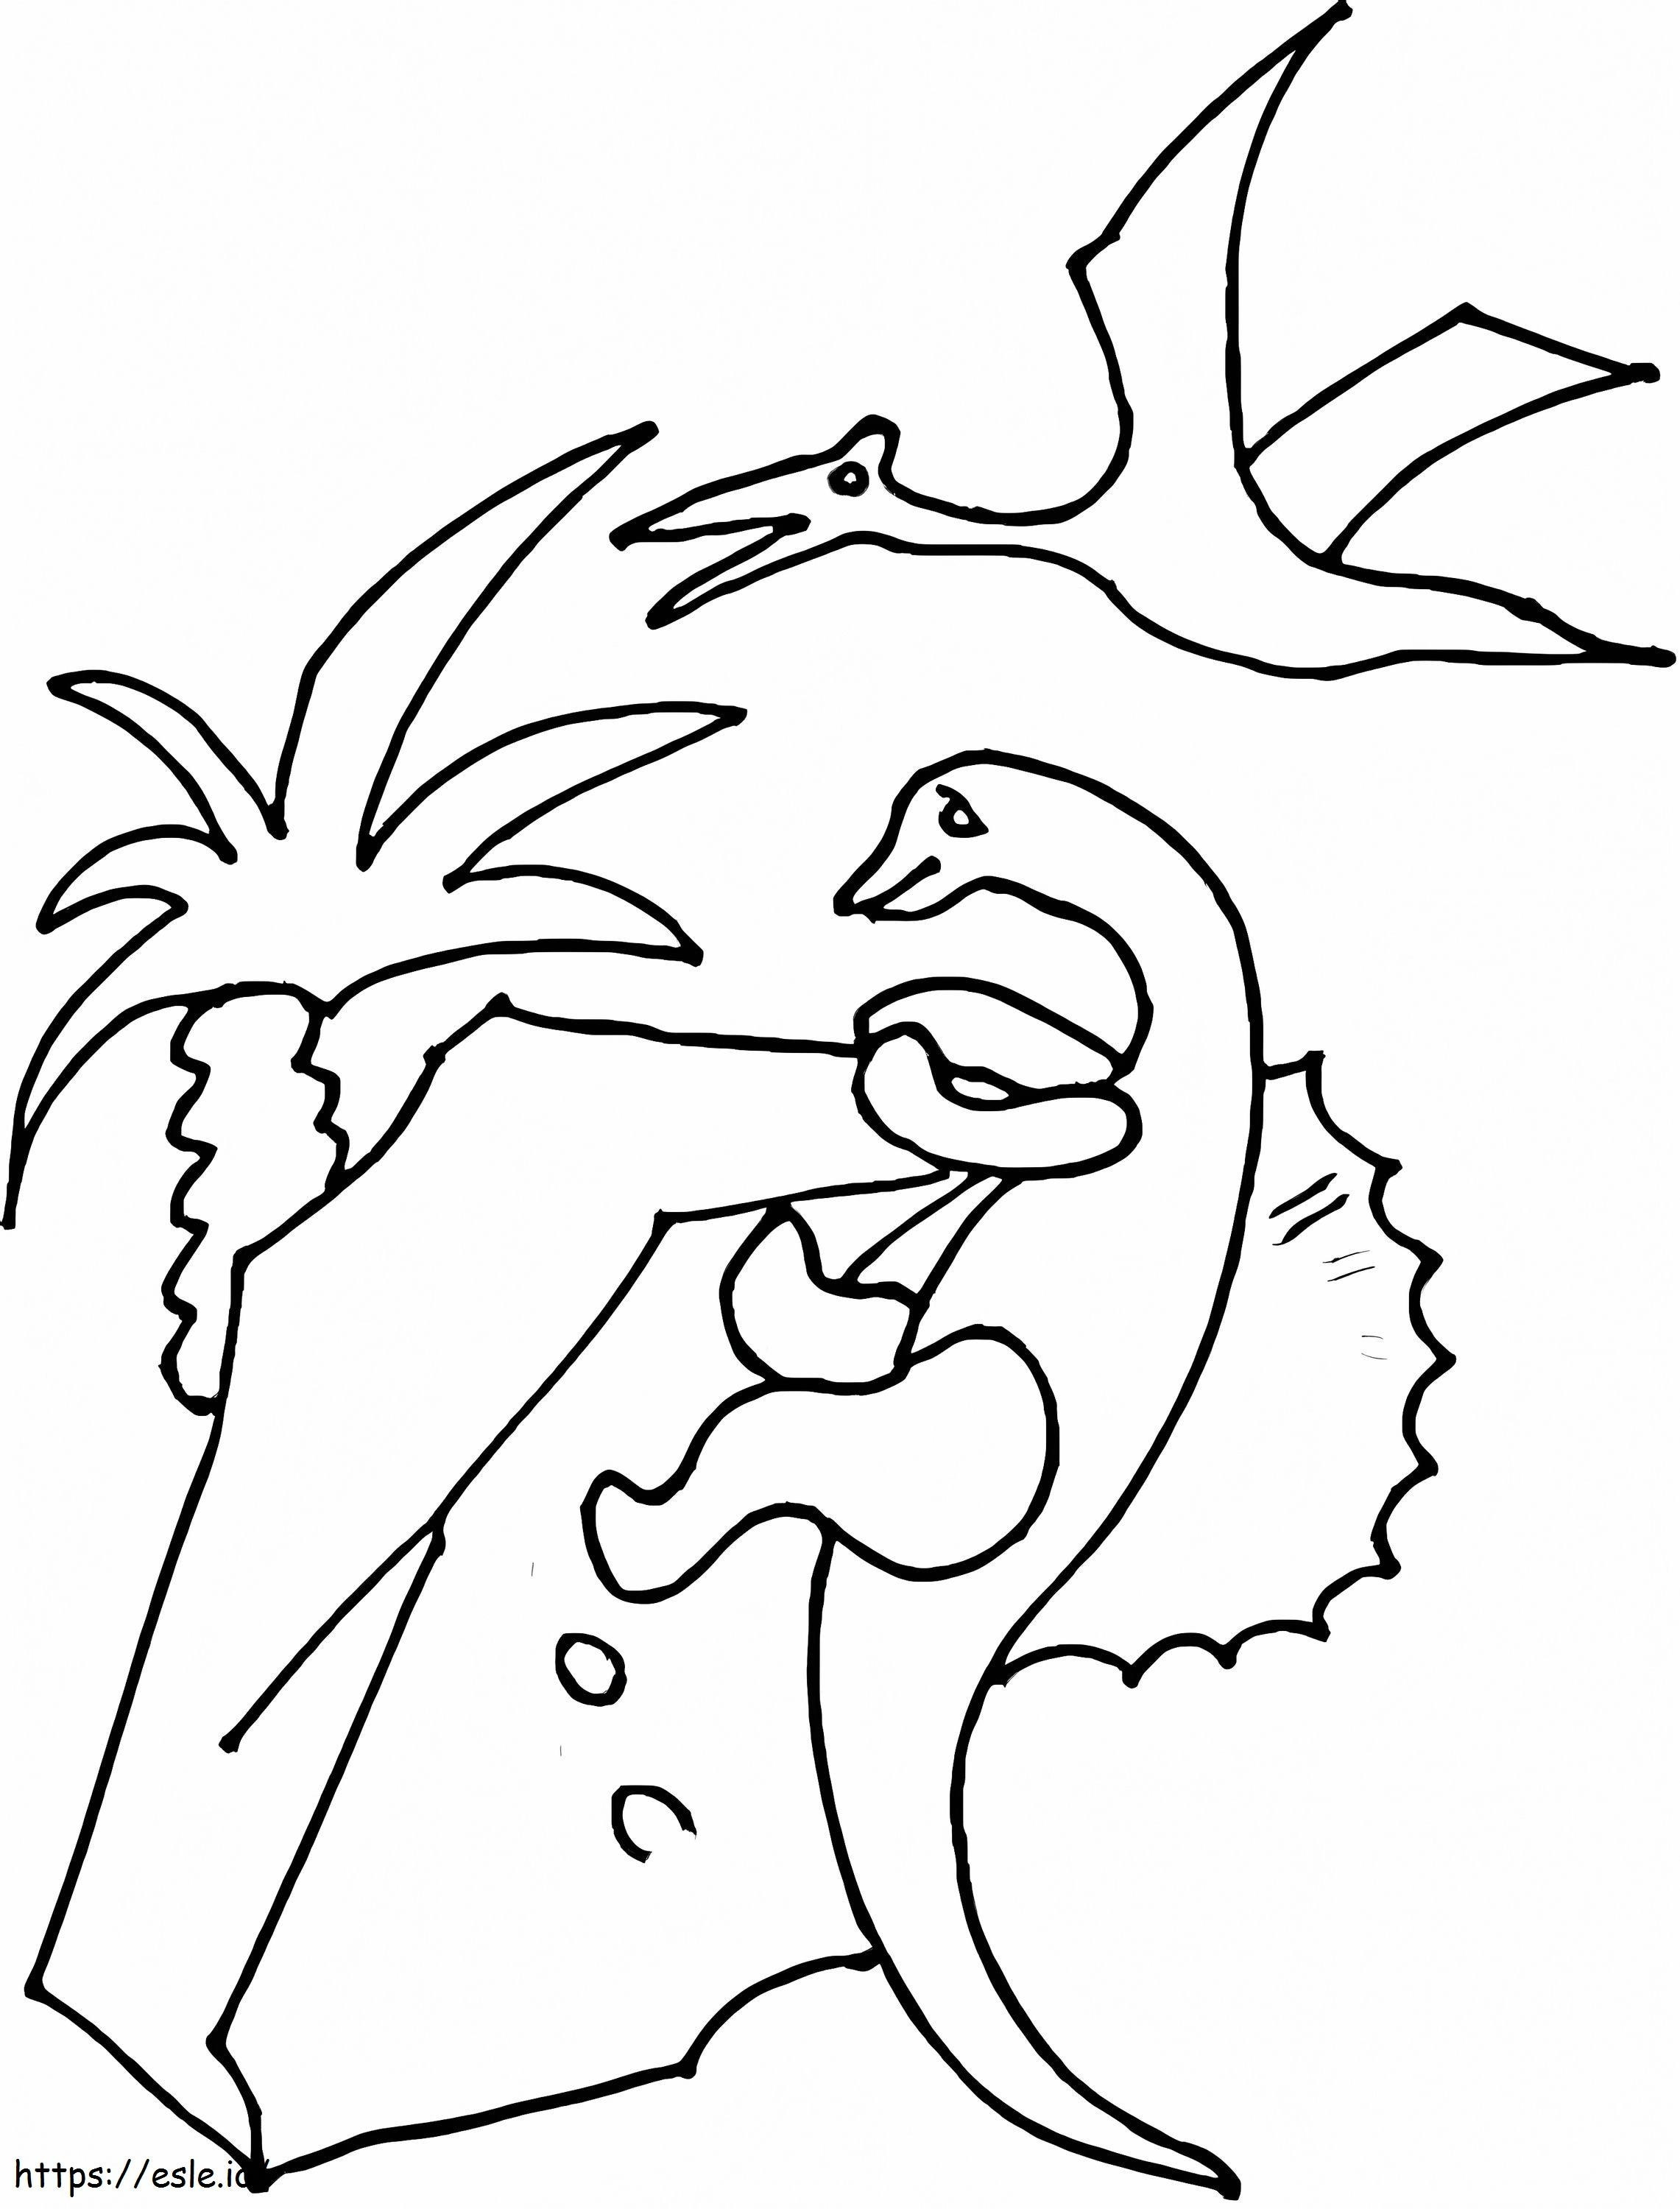 Pterodactyl Over Dinosaur coloring page